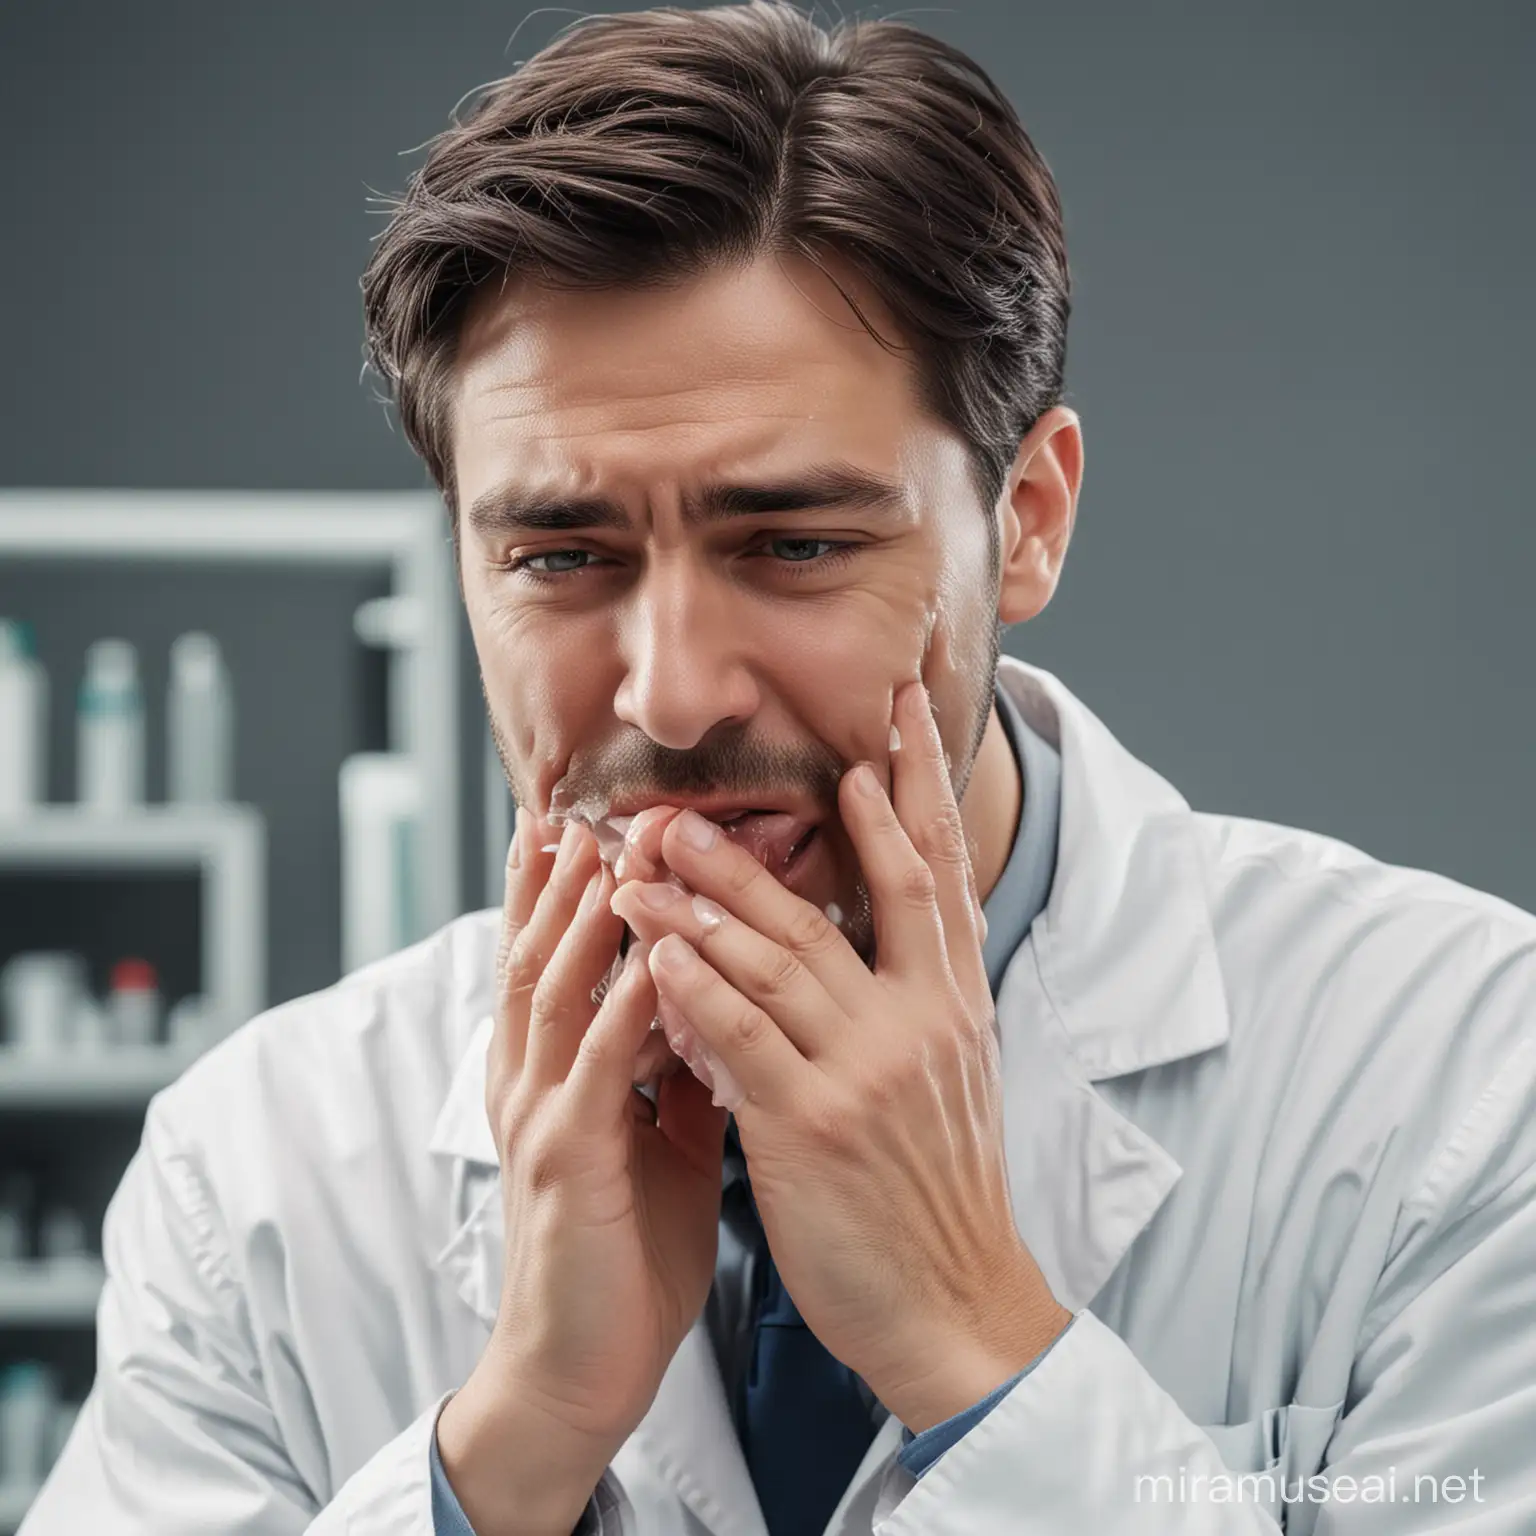 Male Molecular Biologist Crying in Laboratory Setting